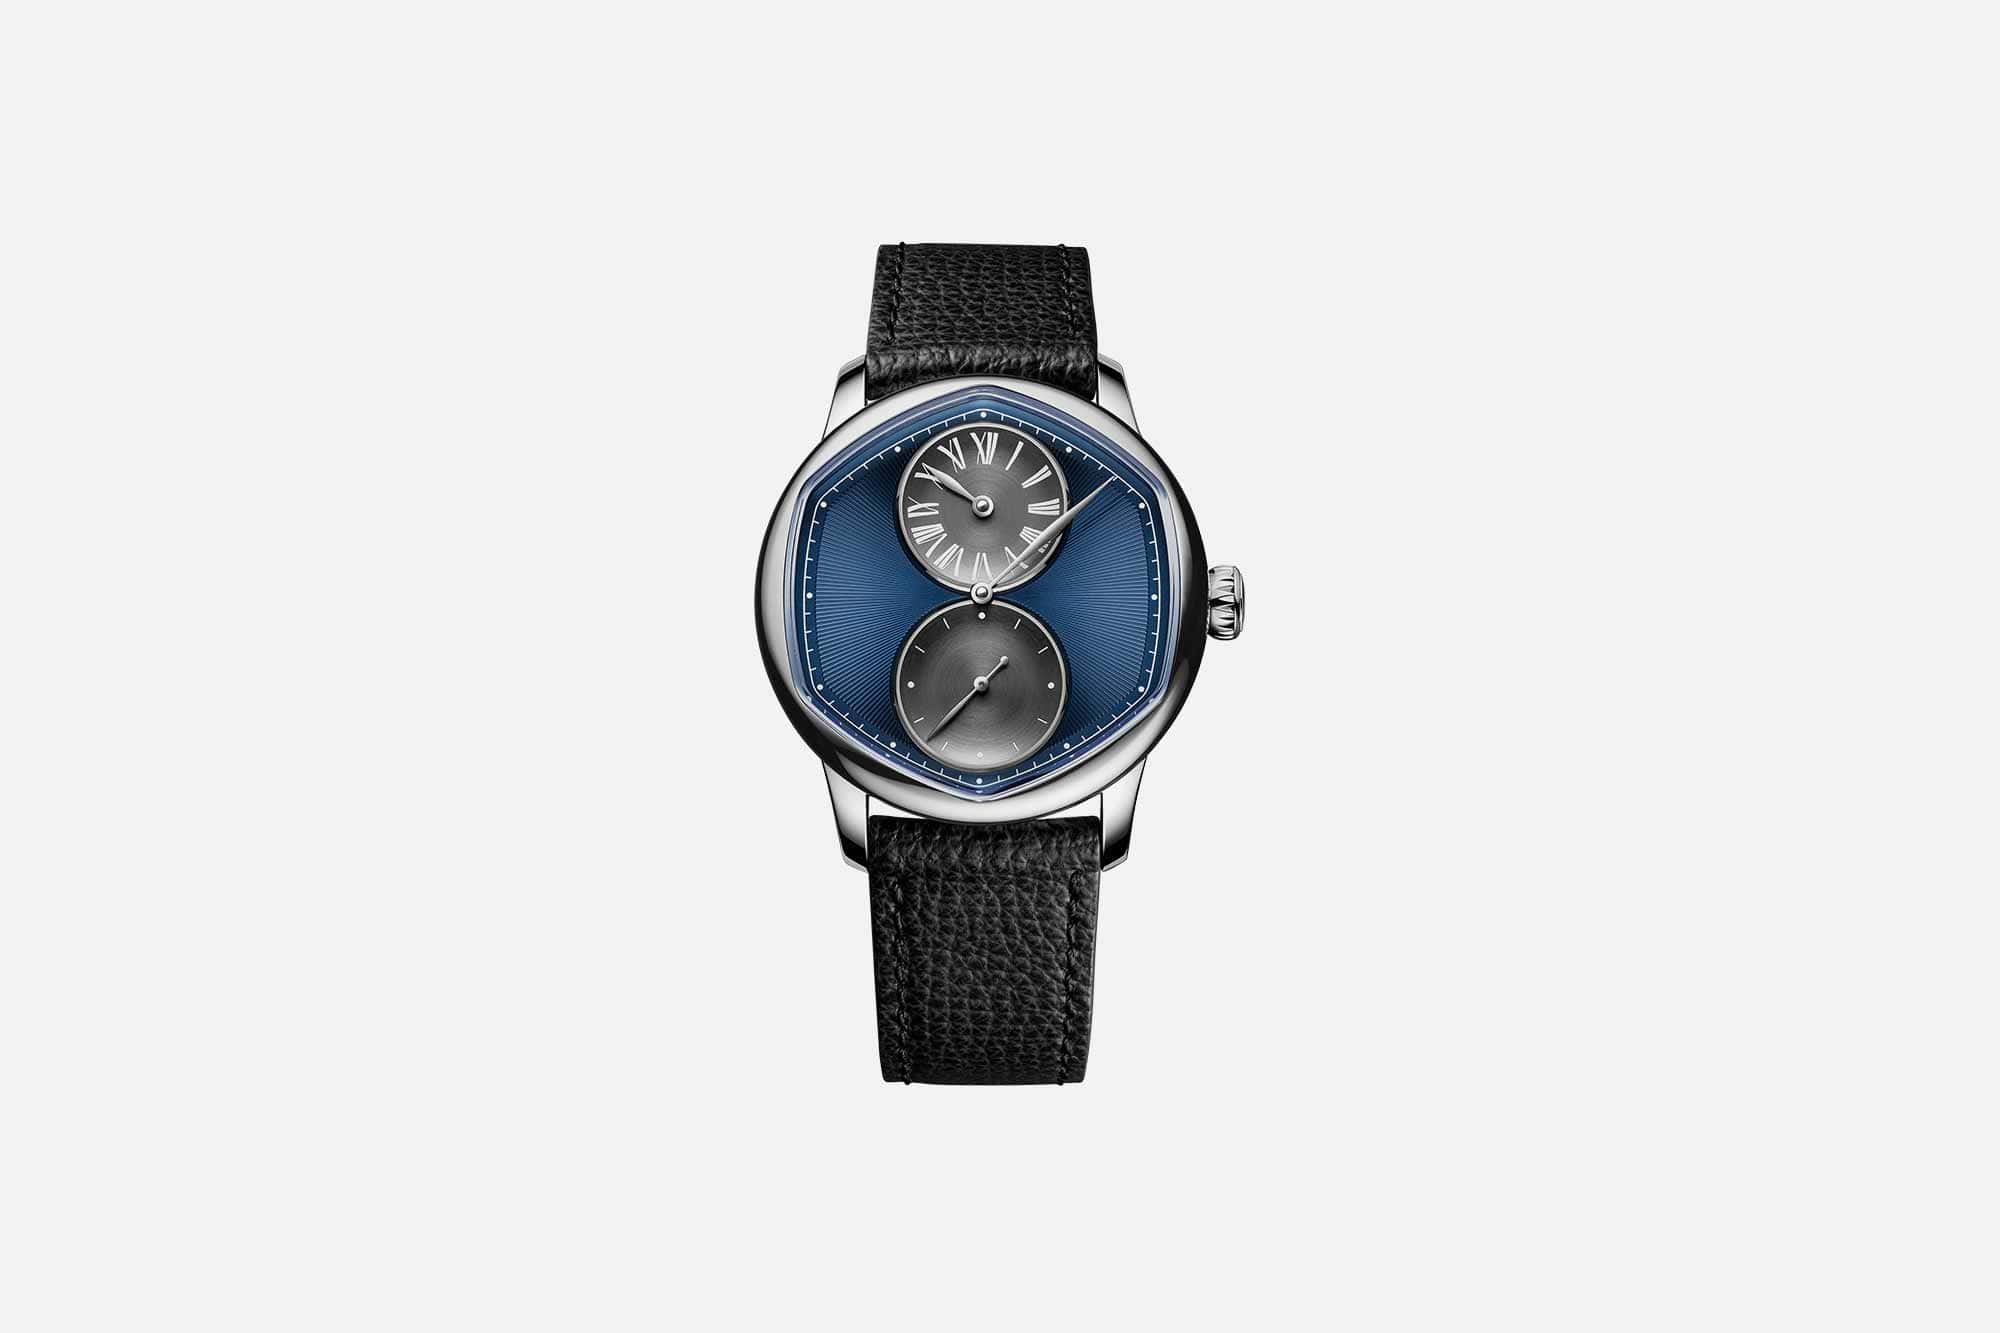 Louis Erard Collaborates with Jeweler and Watchmaker Cédric Johner for their Latest Limited Edition